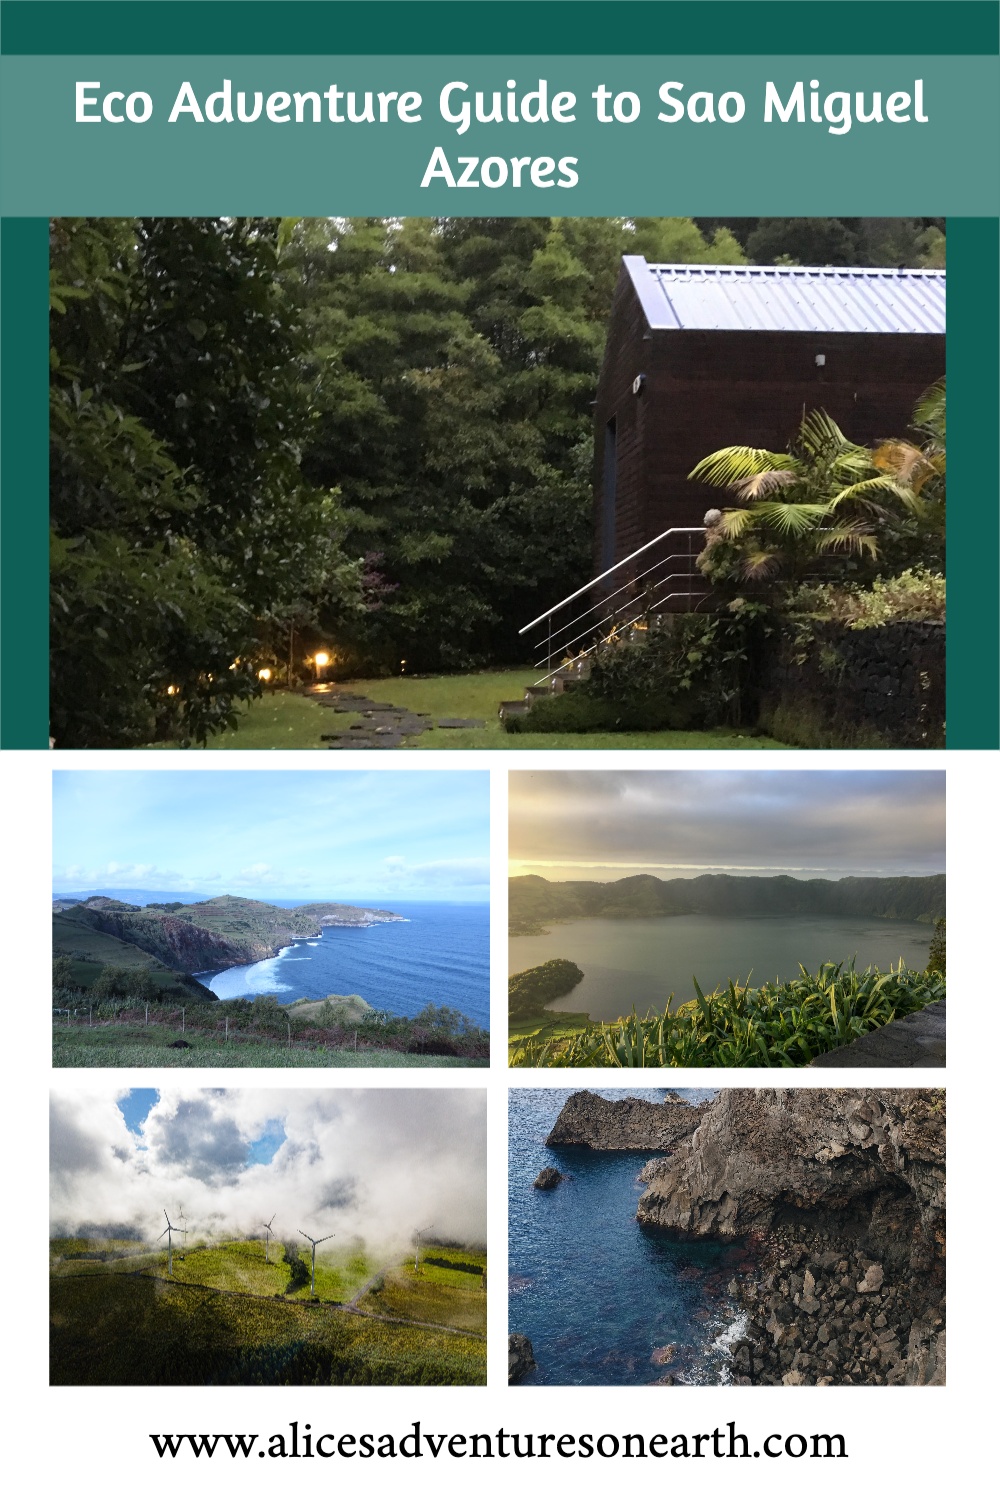 The island of Sao Miguel in the Azores has hot springs, hiking, tra plantations, whale watching and lots of adventure. Here are some of the best eco friendly options for travel and places to stay on the island. #azores #portugal